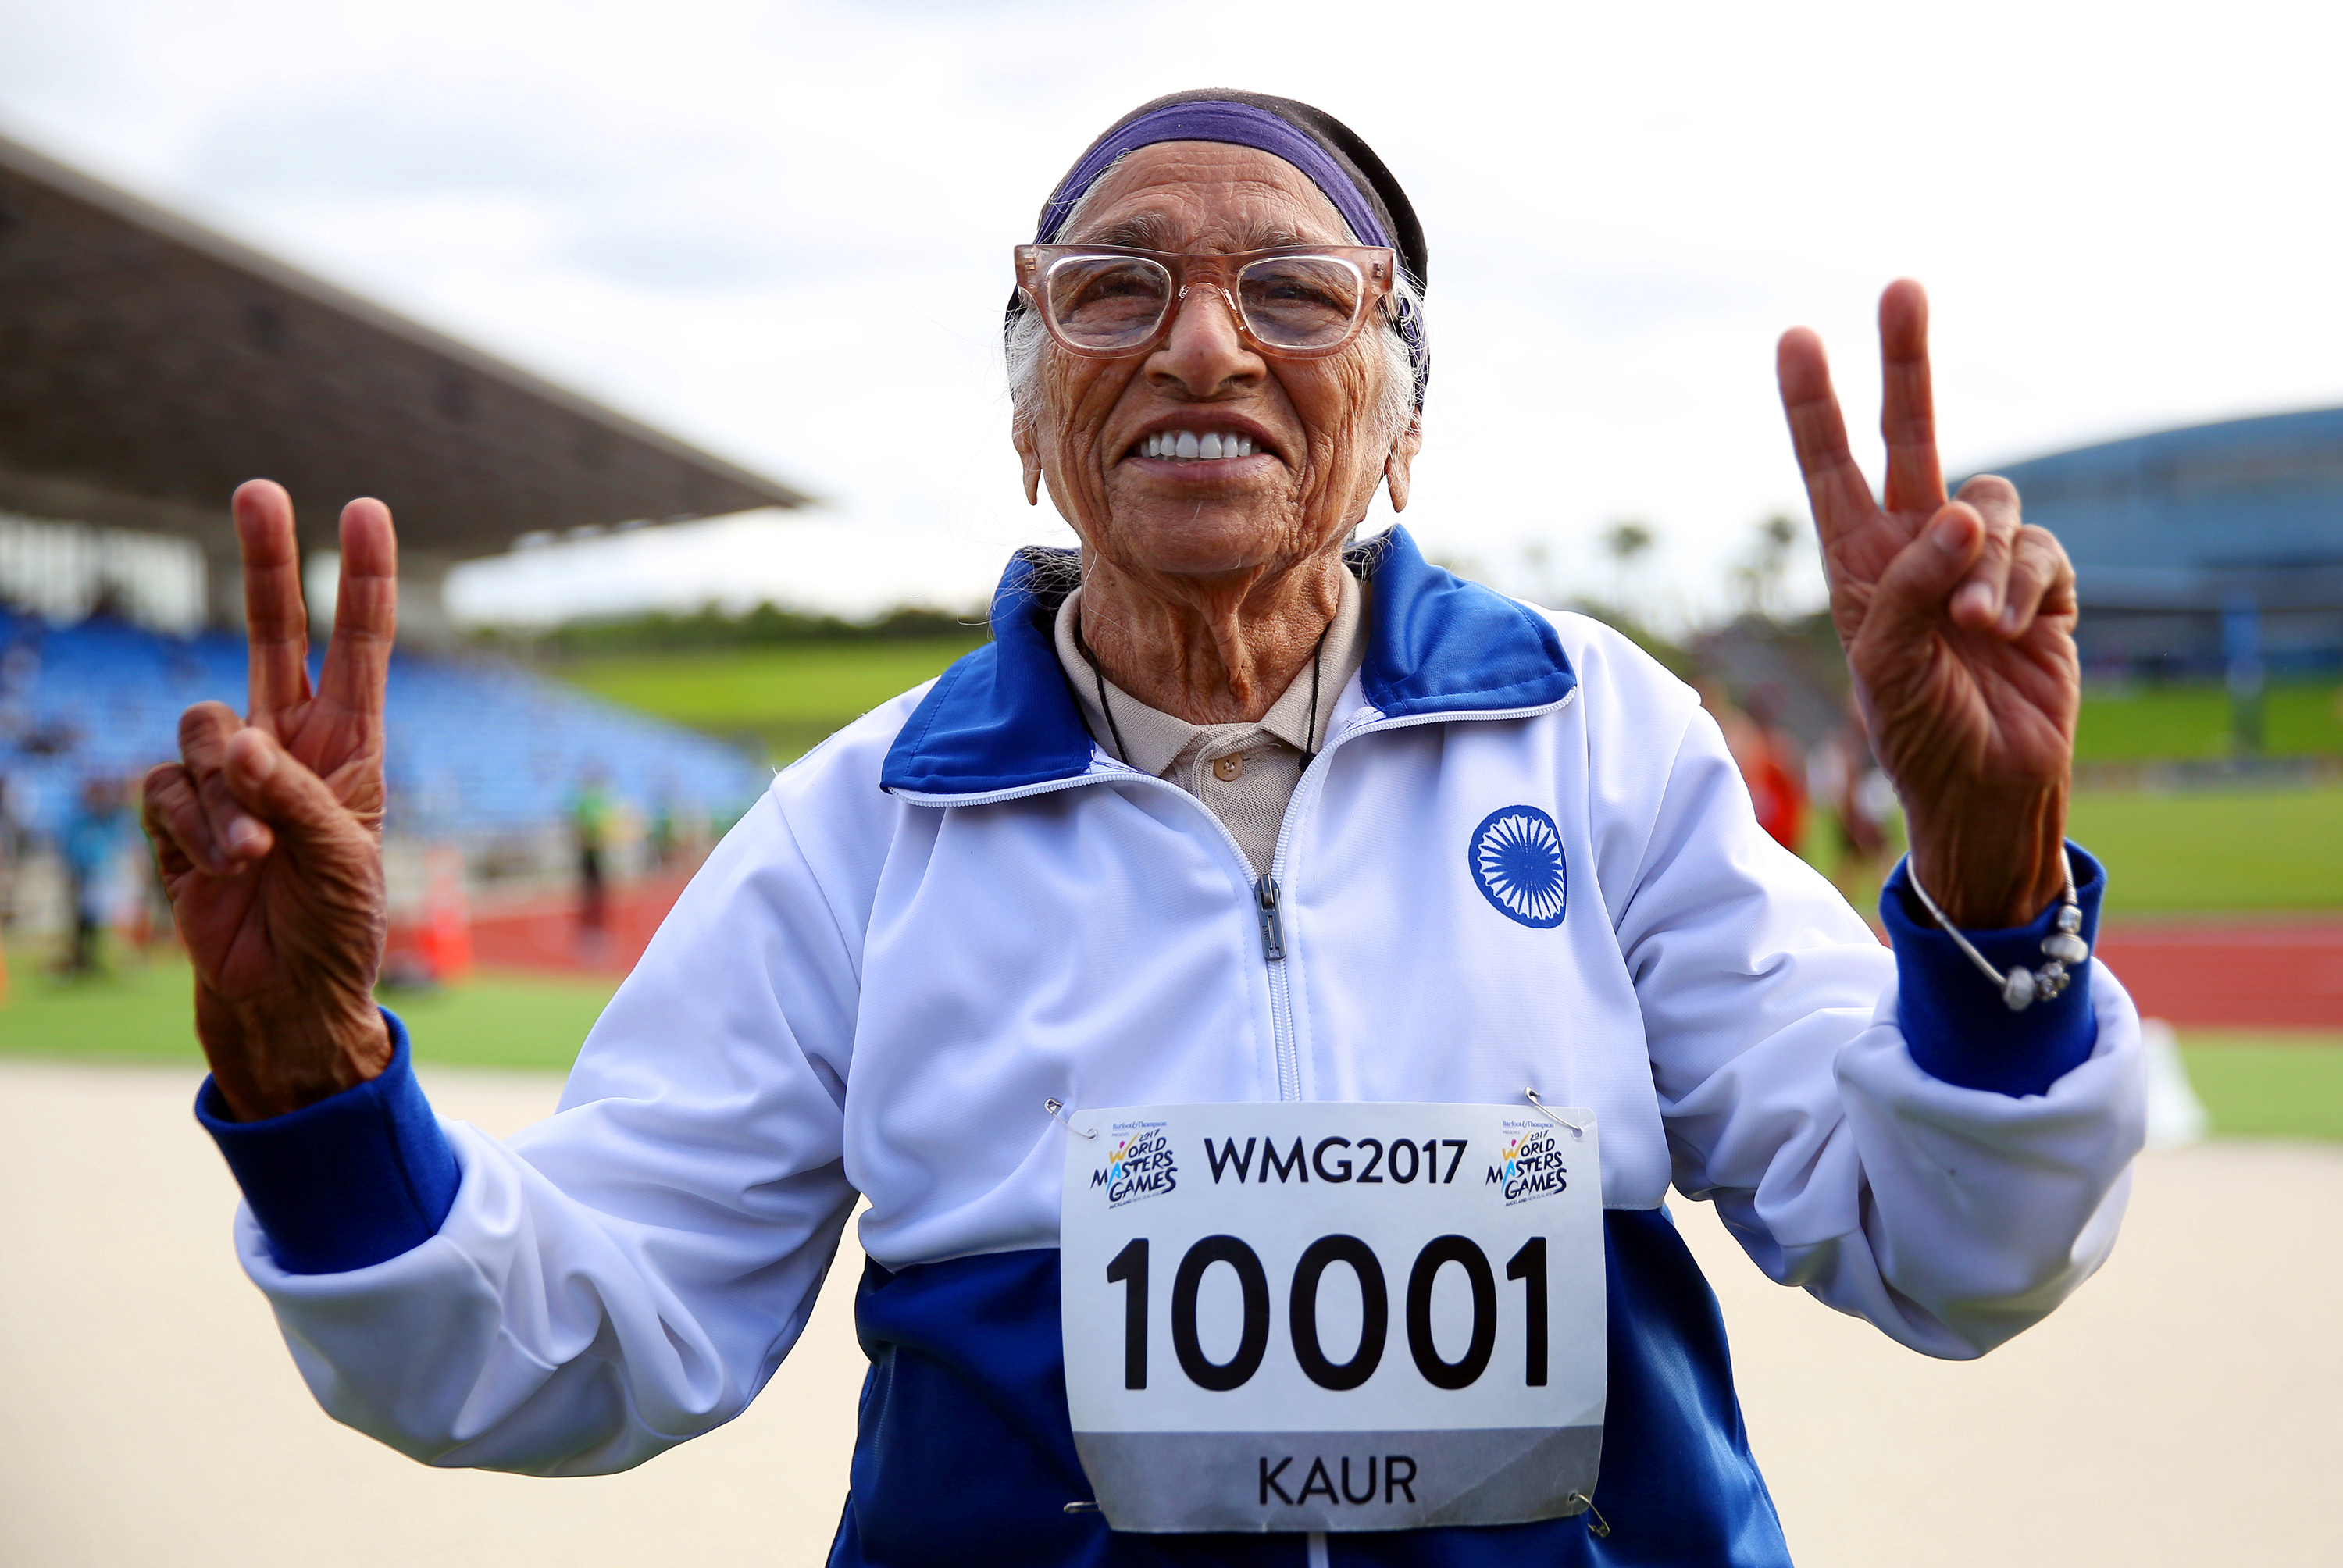 Man Kaur of India celebrates after competing in the 100-meter sprint in the 100+ age category at the World Masters Games in Auckland, New Zealand, in April.
